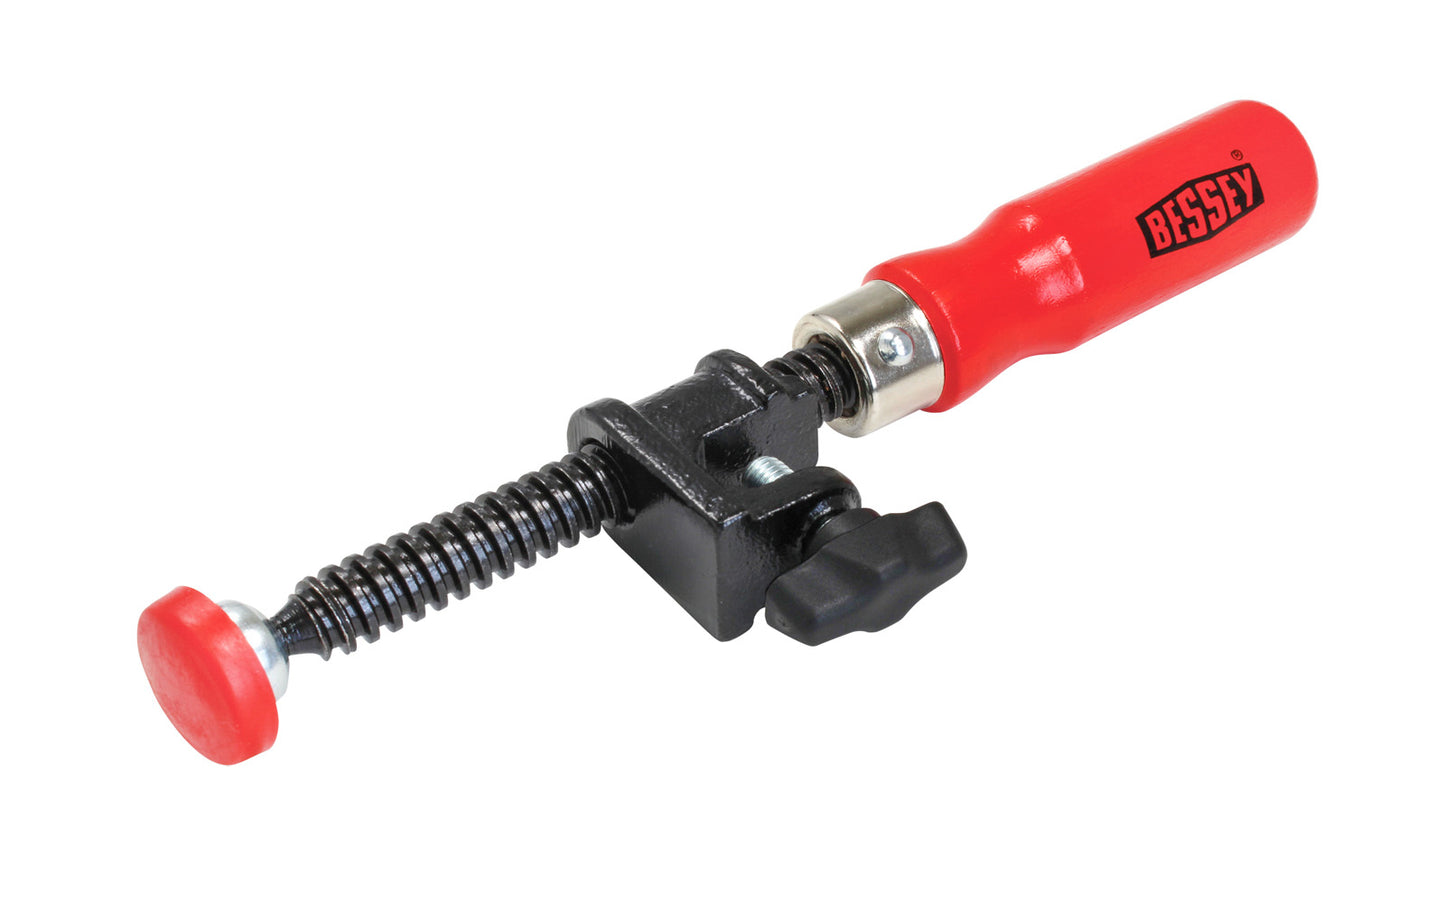 This Bessey single screw edge clamps is suitable for conventional screw clamps with a max rail thickness of 1/2" (13 mm). Comes with a plastic pressure cap to protect the work surface - Model No. KT5-1CP - 091162006757 - Double Screws  - With Wooden Handles - One Screw Edge Clamp - Single Screw Clamps